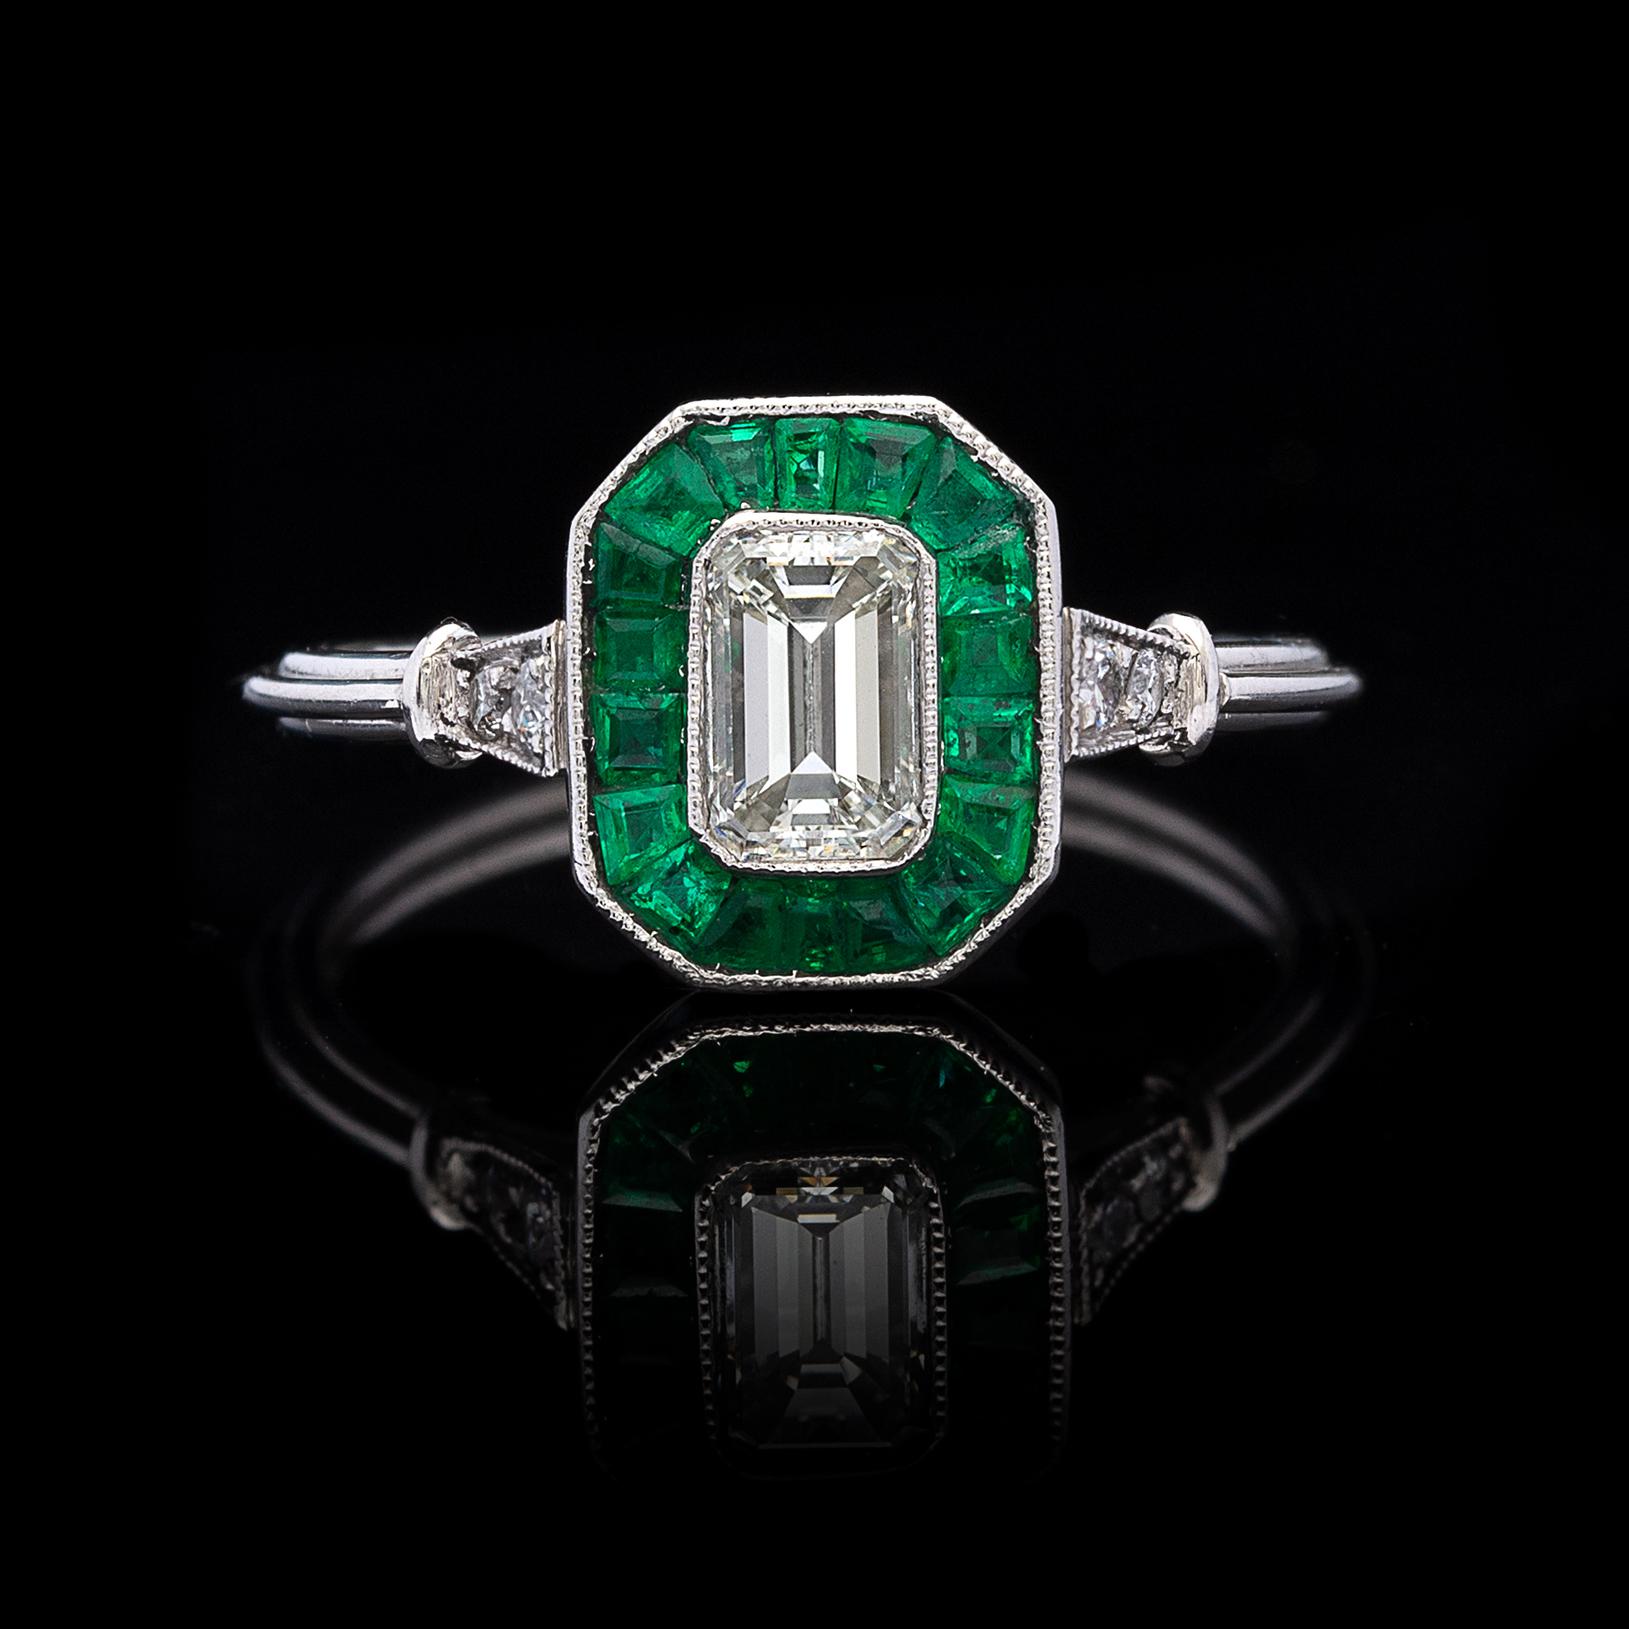 Hark back to an era of fine design with this lovely Art Deco inspired 18k white gold ring! It centers a bezel-set emerald-cut diamond, weighing an estimated 0.50 carat, G/VS, set within a frame of calibre-cut emeralds, and then highlighted with 4